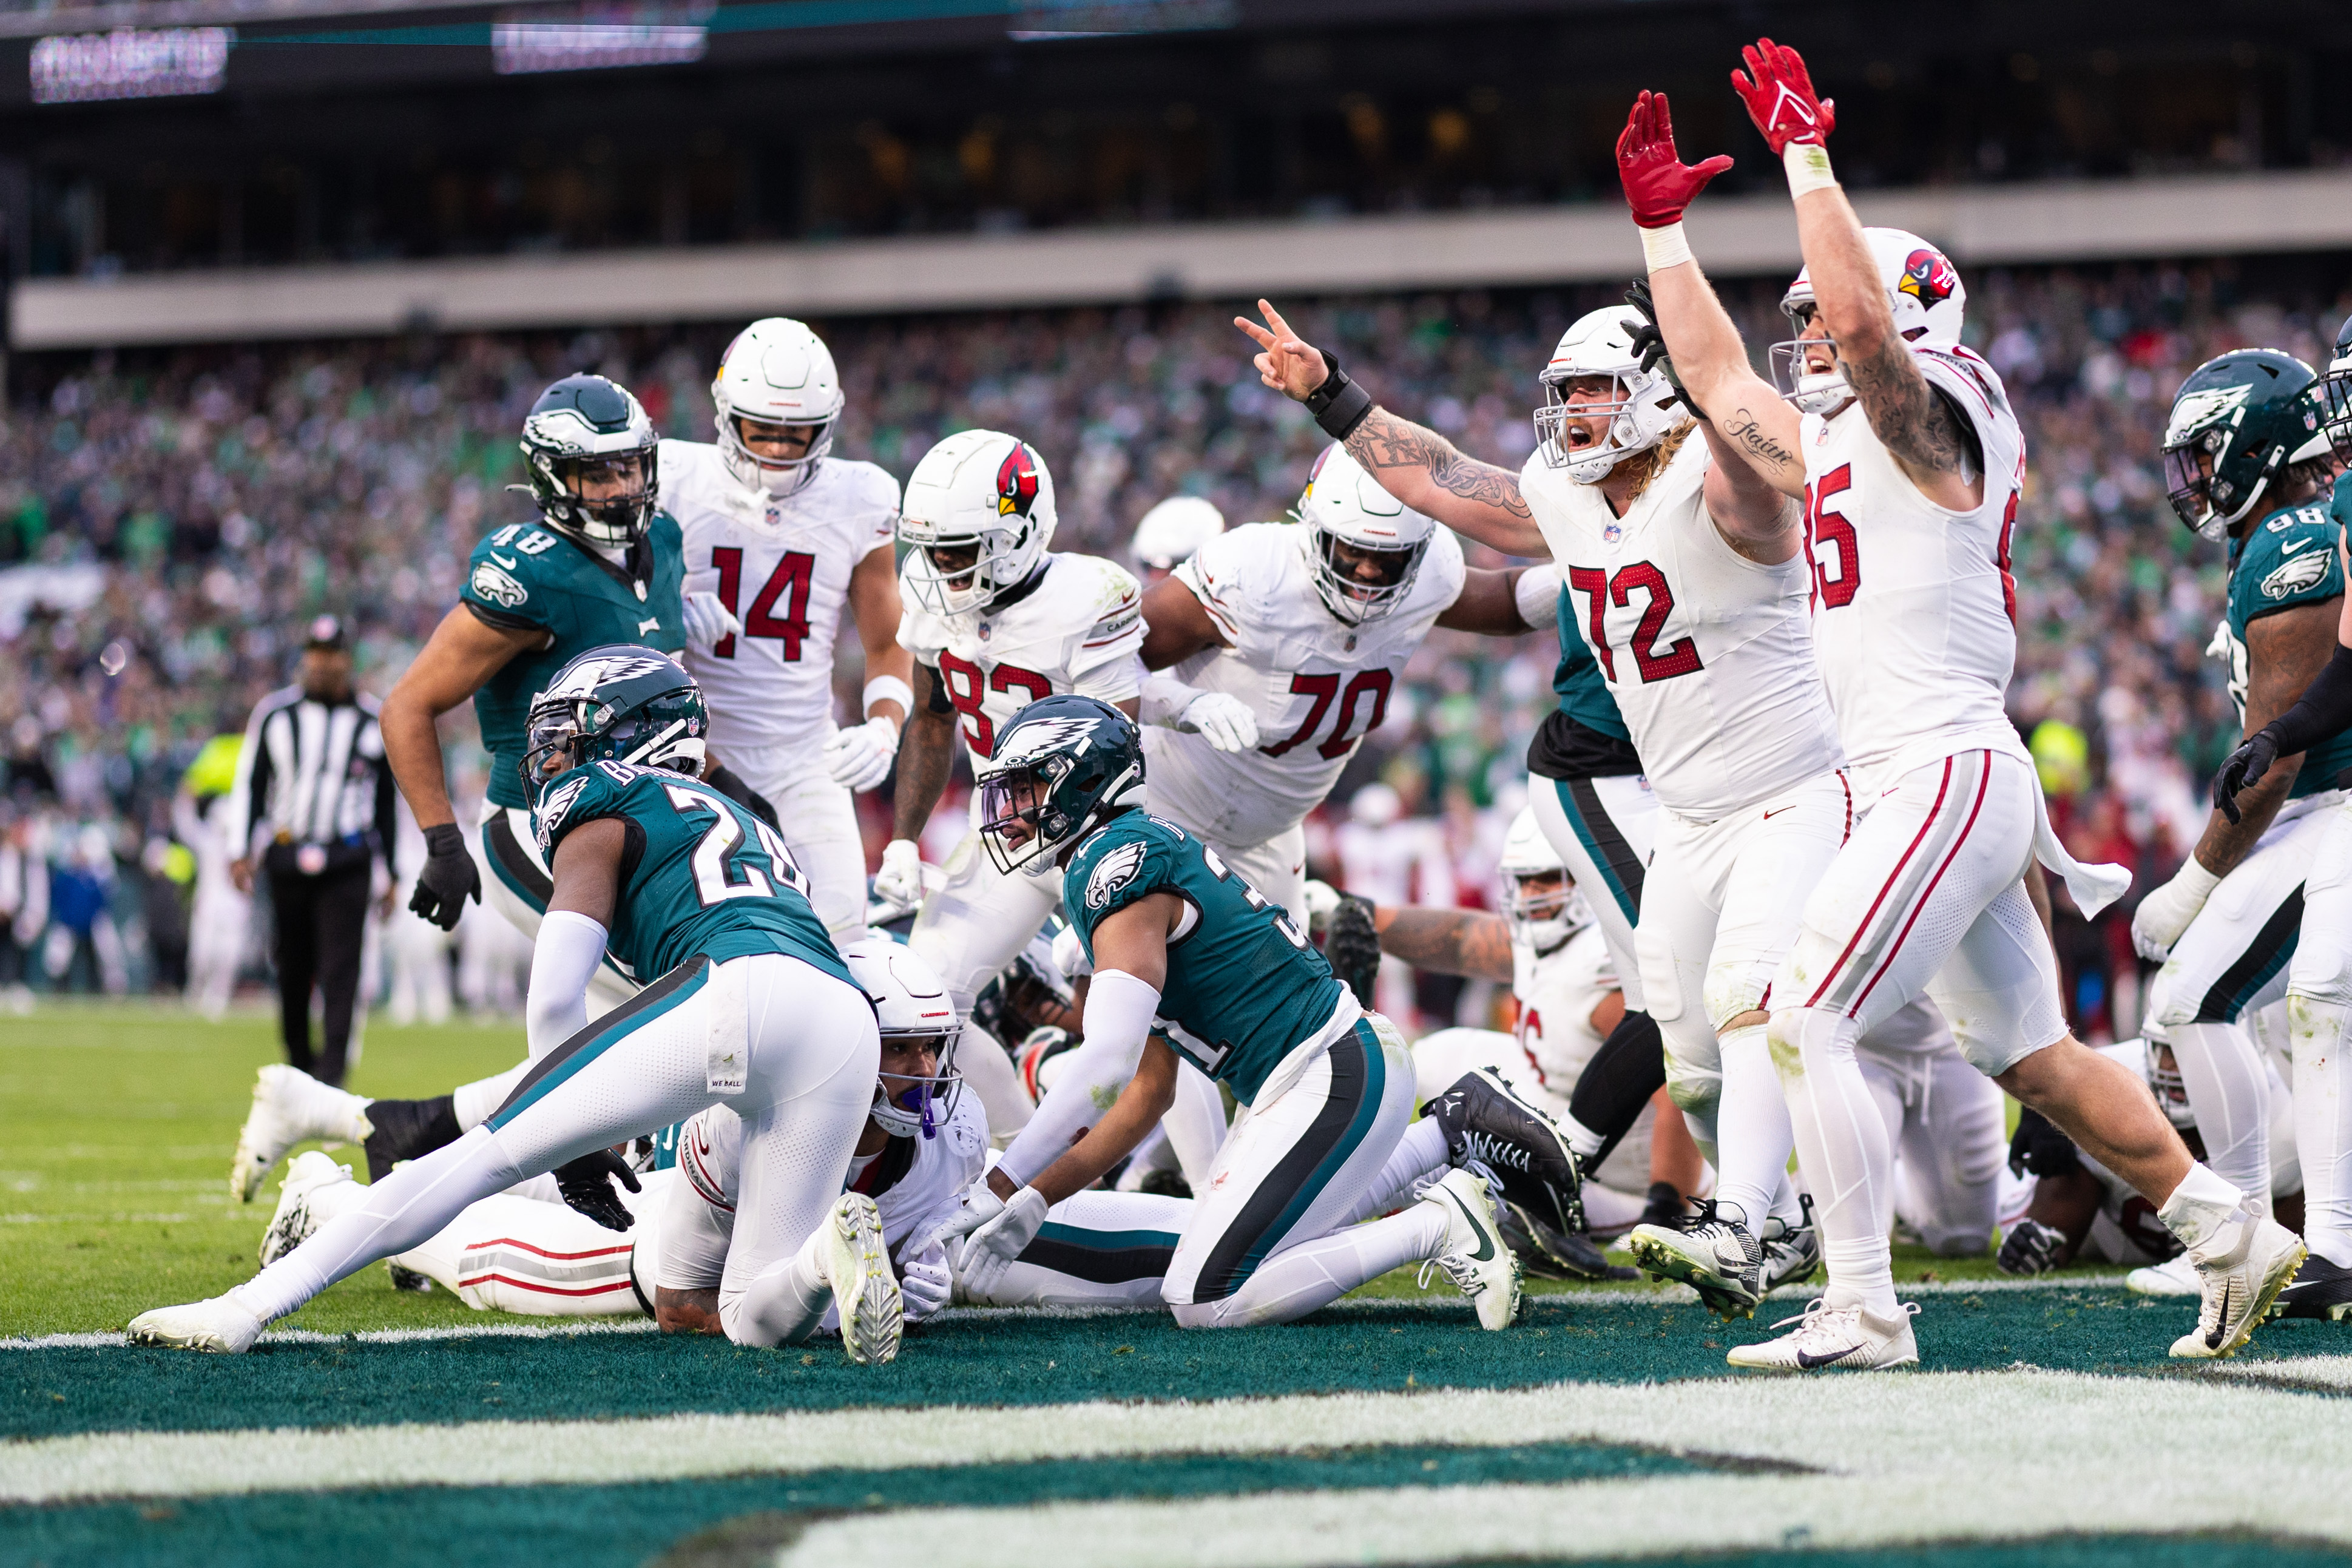 Are troubled Eagles primed for upset by Cardinals? Experts' picks